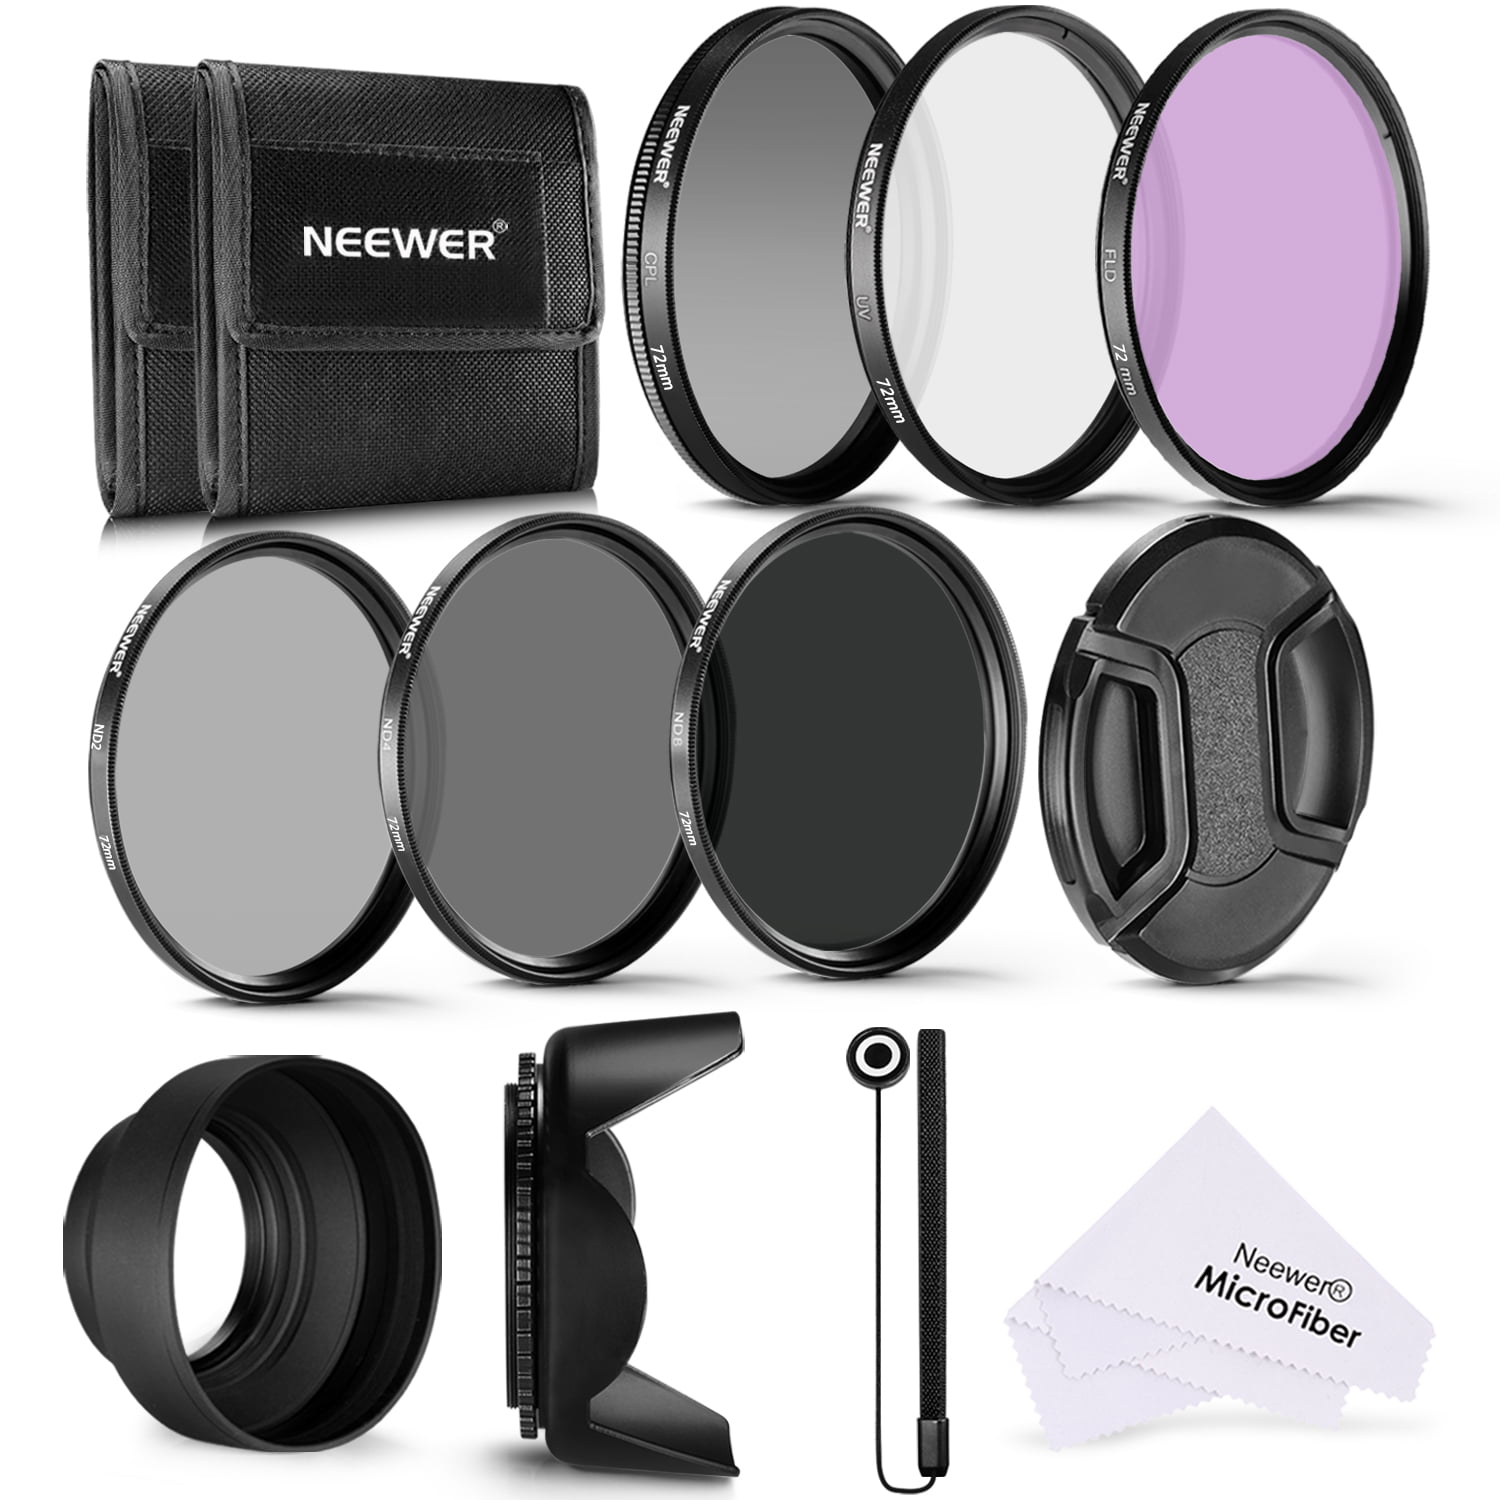 ND2,ND4,ND8 +1,+2,+4,+10 Includes 72MM UV,CPL,FLD Filter Close up Macro Filters Mini Table Tripod and Others for All Lenses with 72MM Thread Size Neewer 72MM Camera Lens Filter Kit ND Filters 